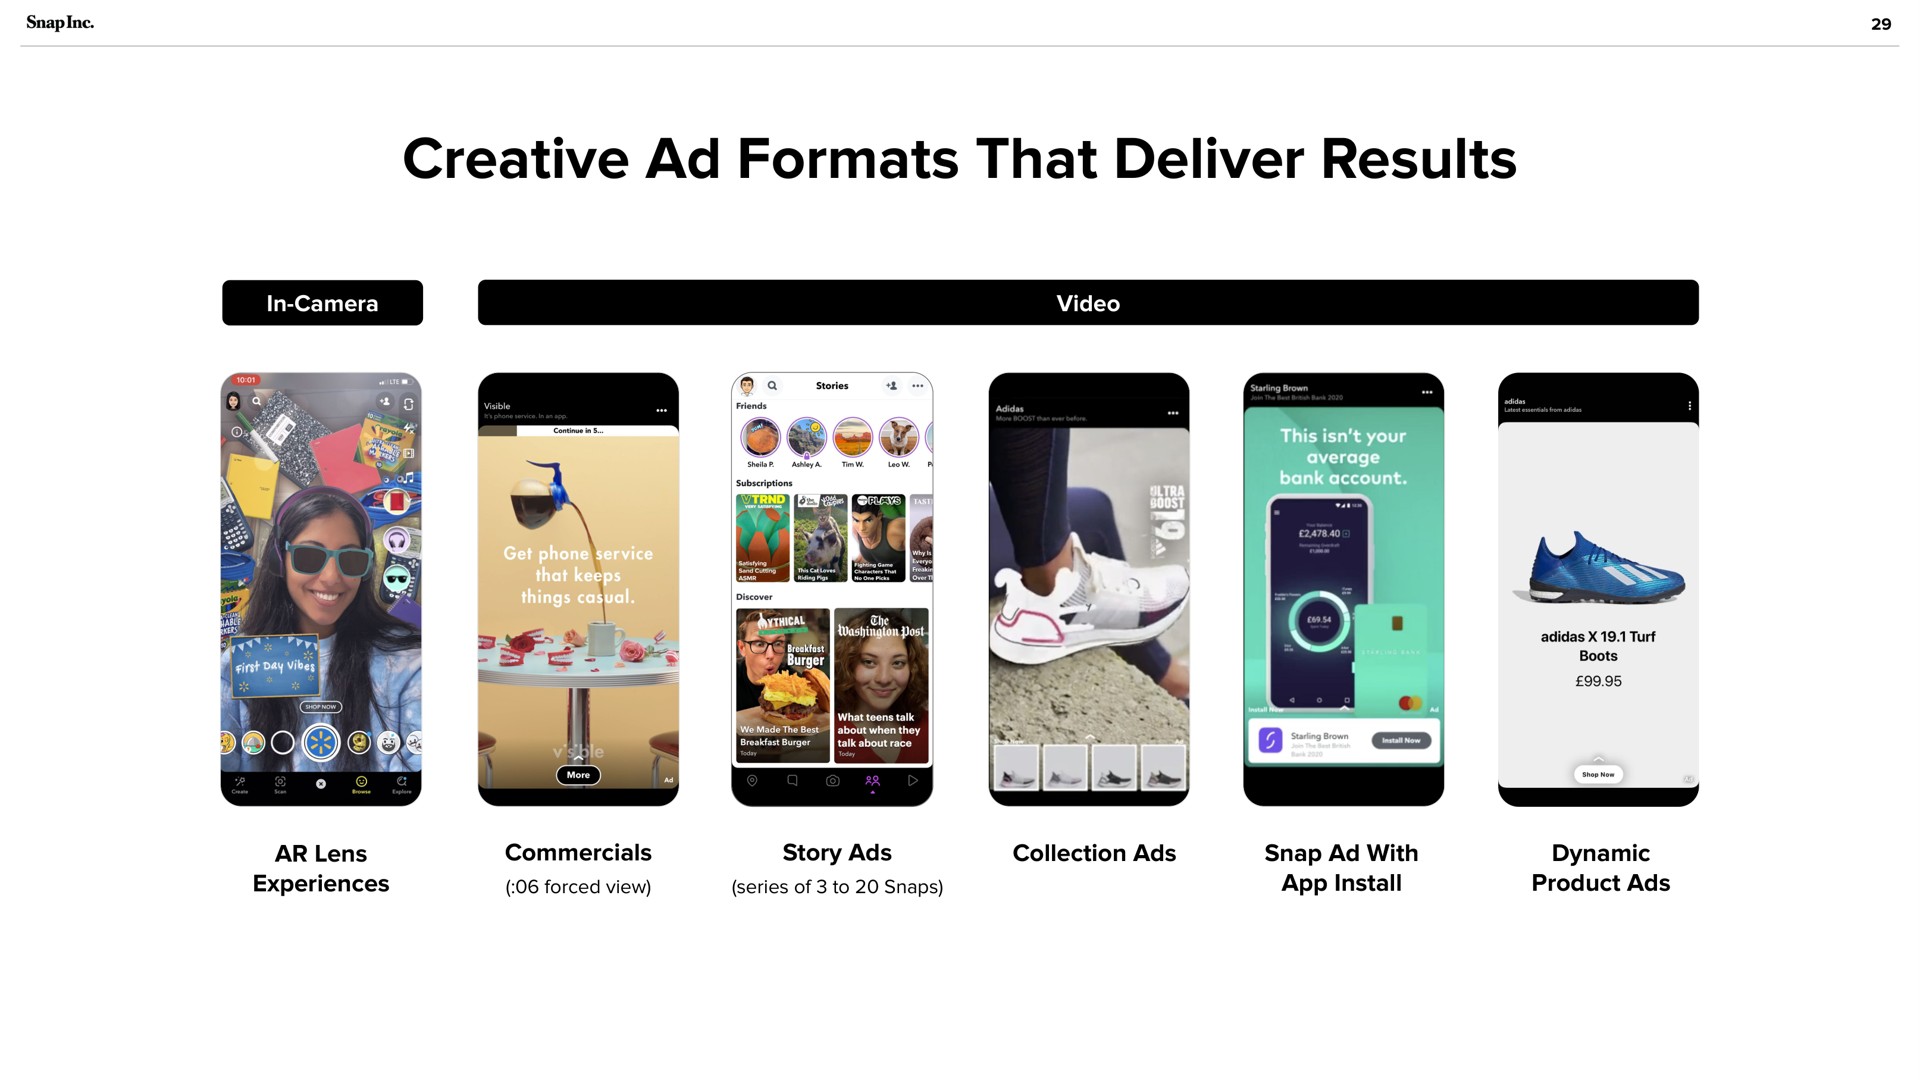 creative formats that deliver results | Snap Inc